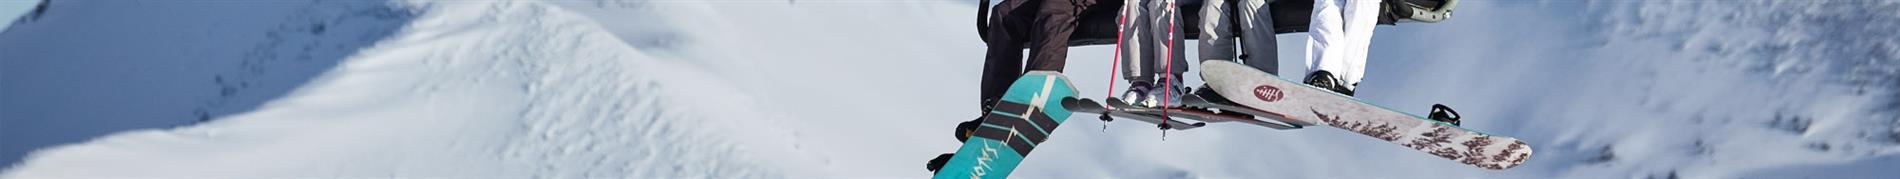 Union Binding Company Women's skis, snowboards, and accessories for everything snow. 